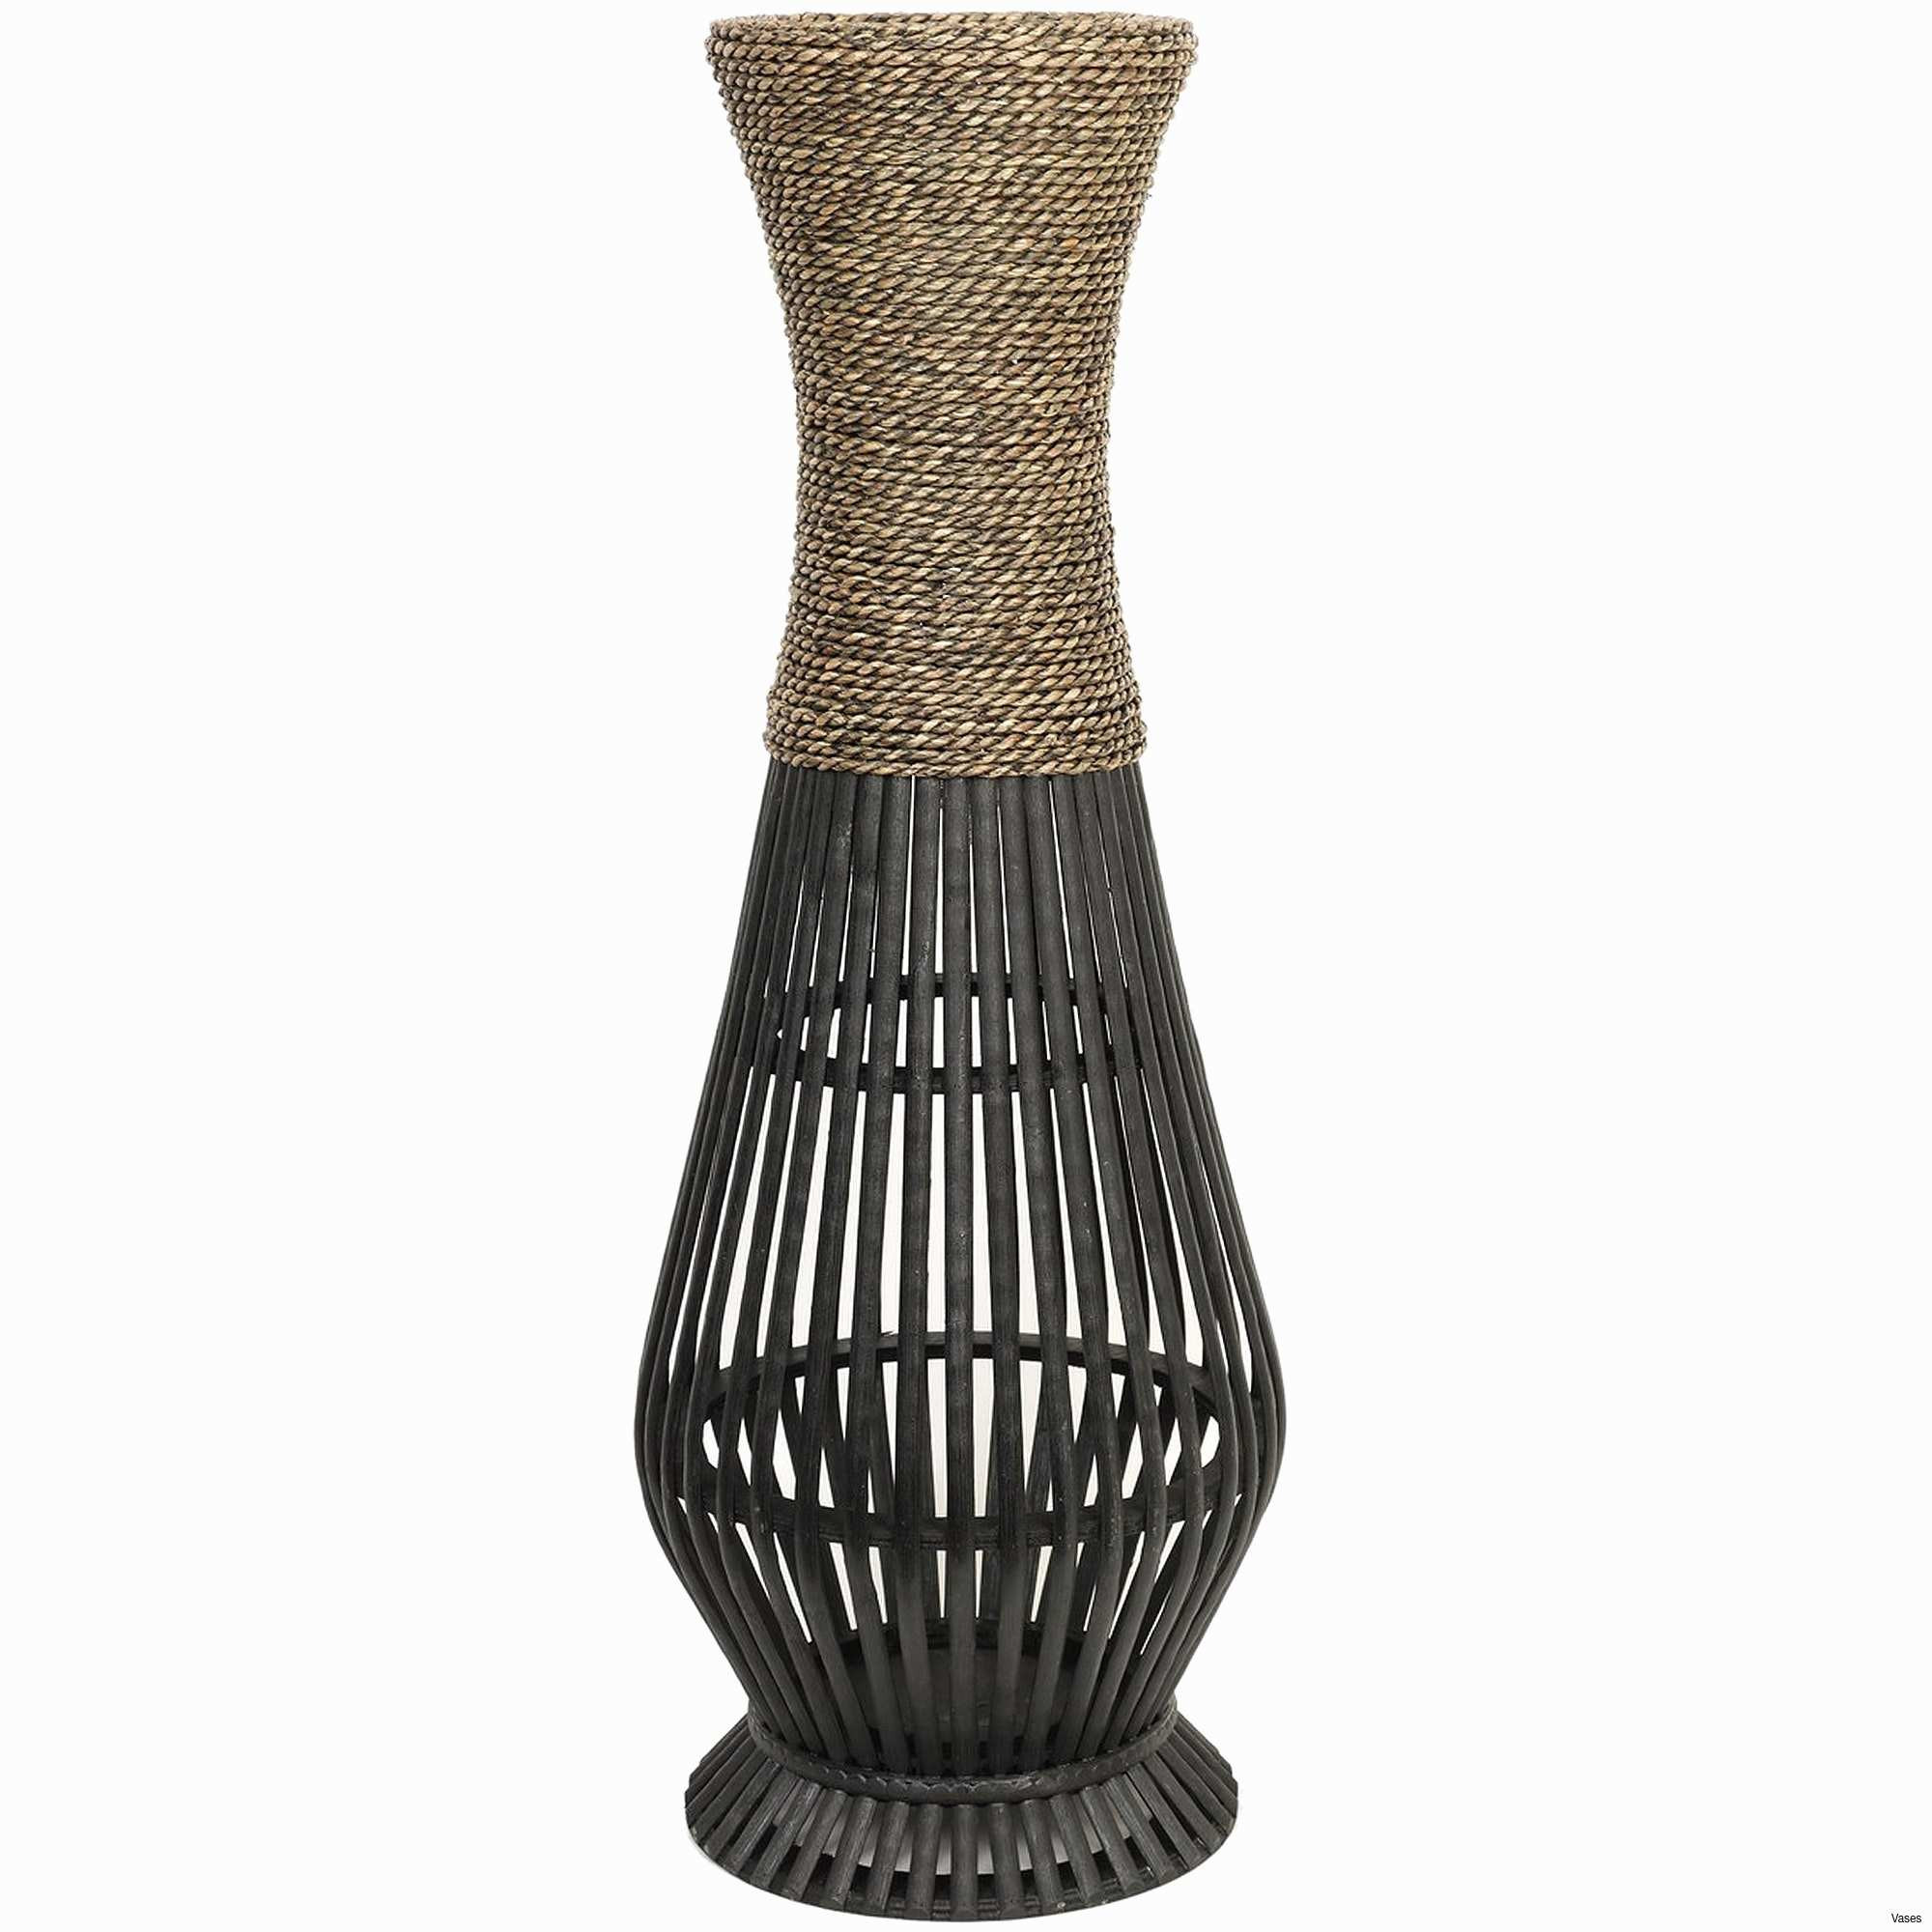 29 Best Large Mosaic Floor Vases 2024 free download large mosaic floor vases of tall wood floor vase collection wooden home decor lovely d dkbrw with regard to tall wood floor vase collection wooden home decor lovely d dkbrw 5743 1h vases tal